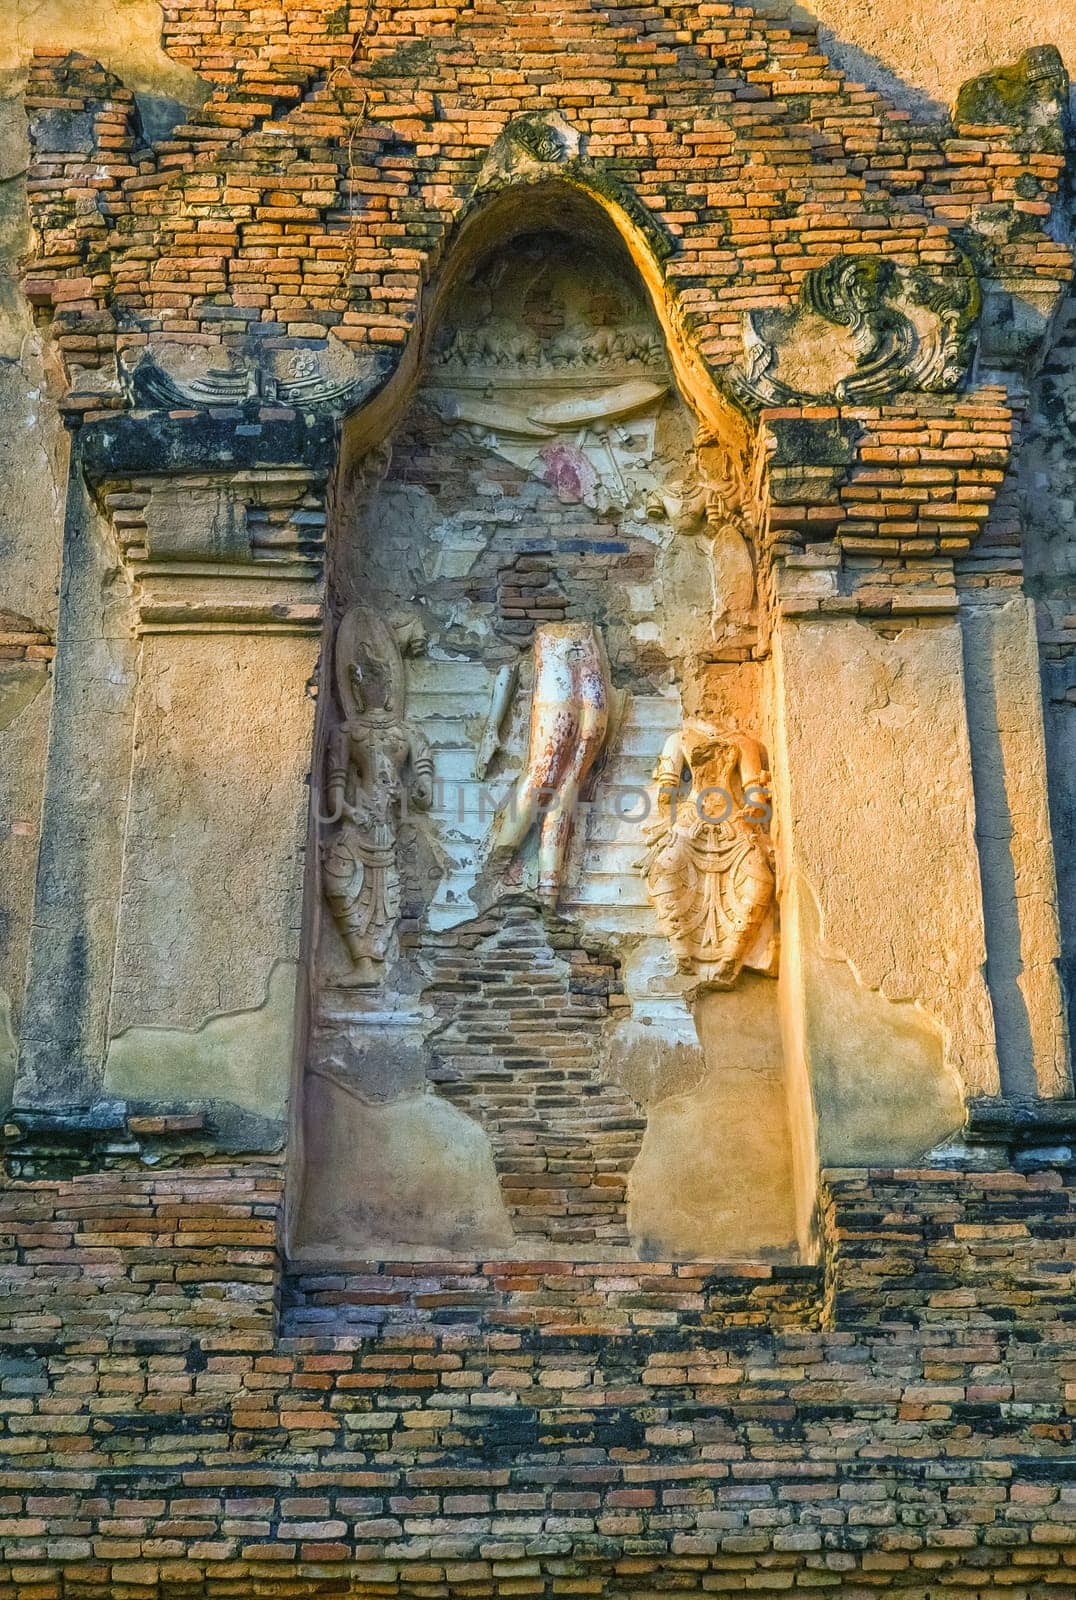 Wat Thraphang Thong Lang temple in Sukhothai, UNESCO World Heritage Site, Thailand by Elenaphotos21